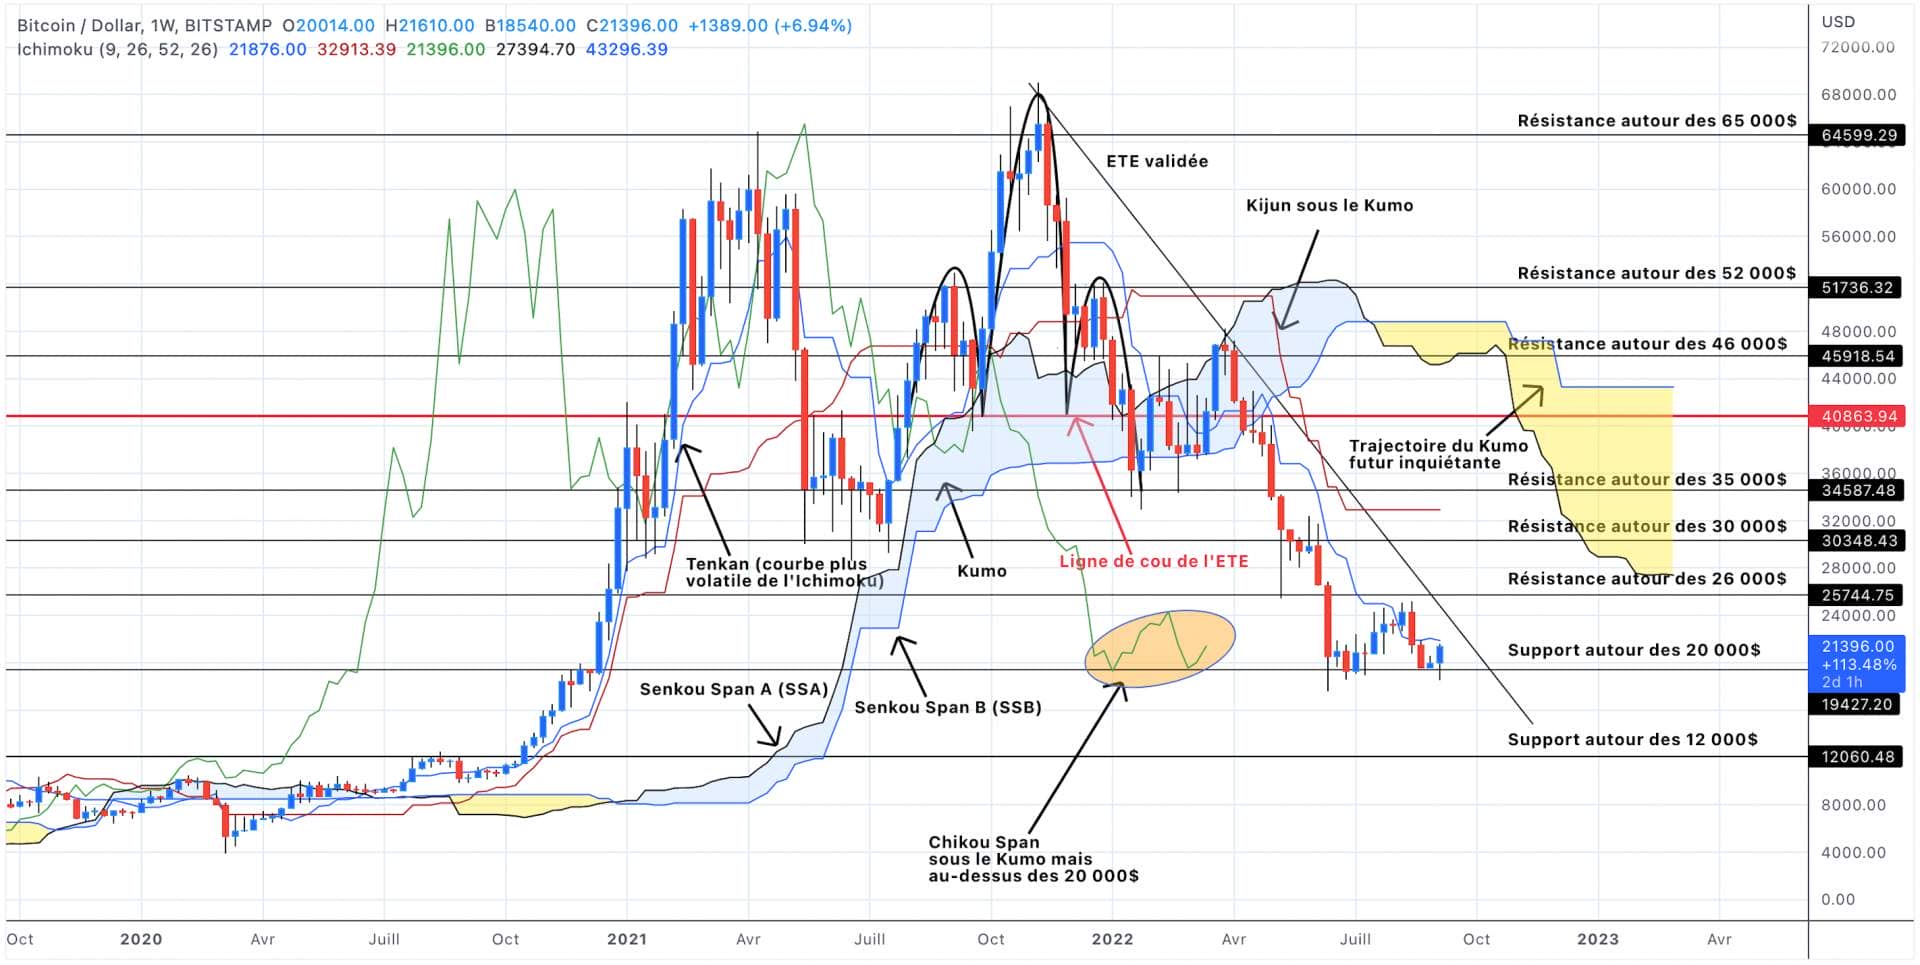 Bitcoin price analysis in weekly units - September 10, 2022